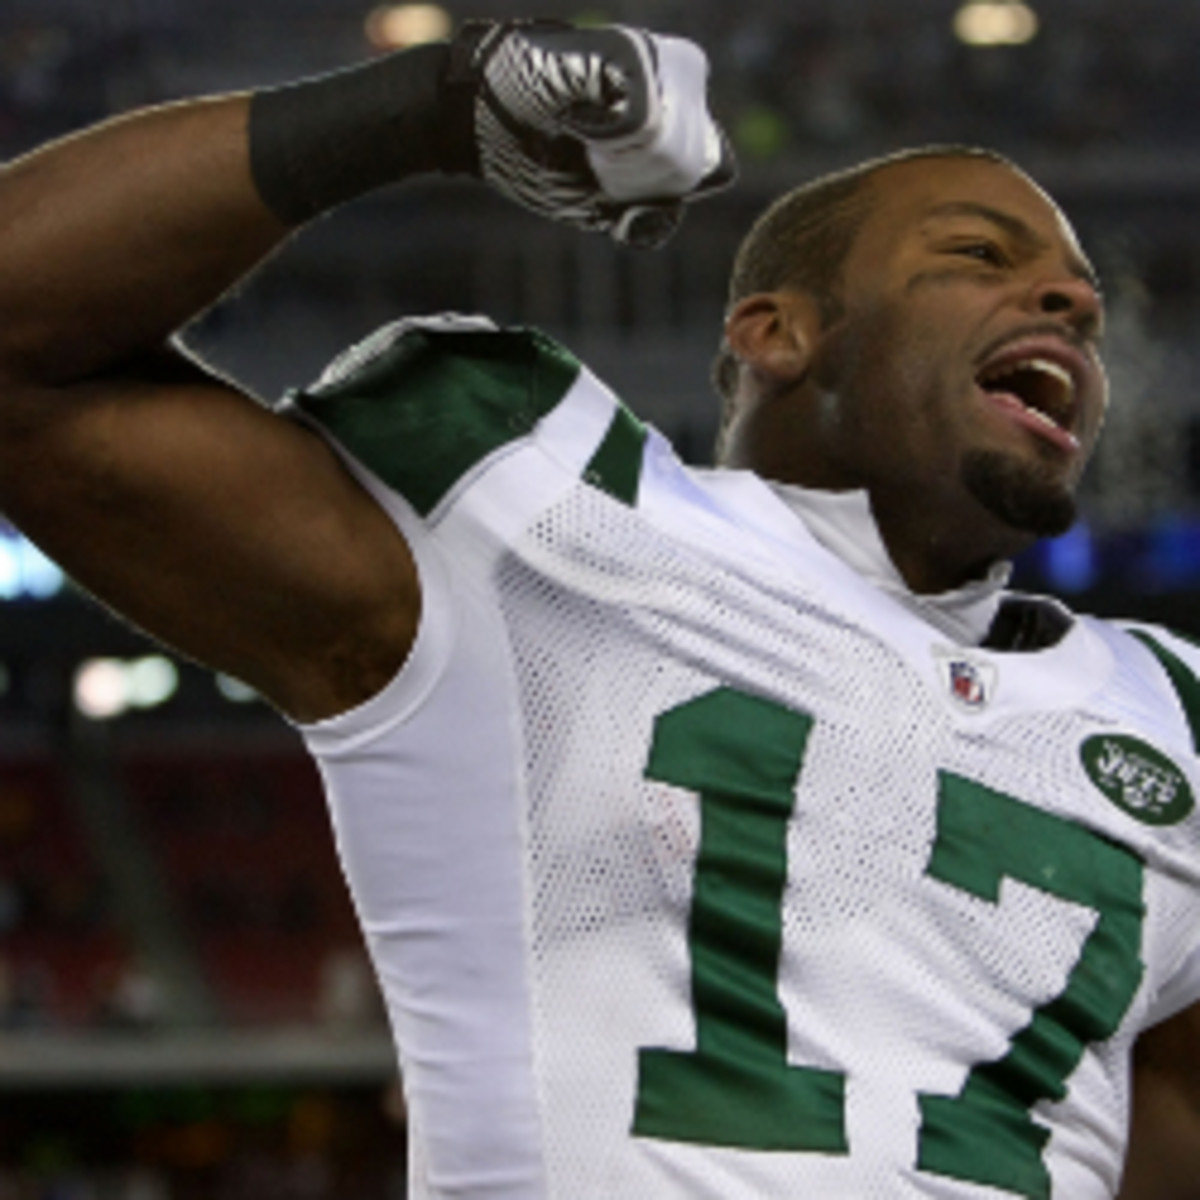 Braylon Edwards last played for the Jets in the 2010 season. (Michael Heiman/Getty Images)